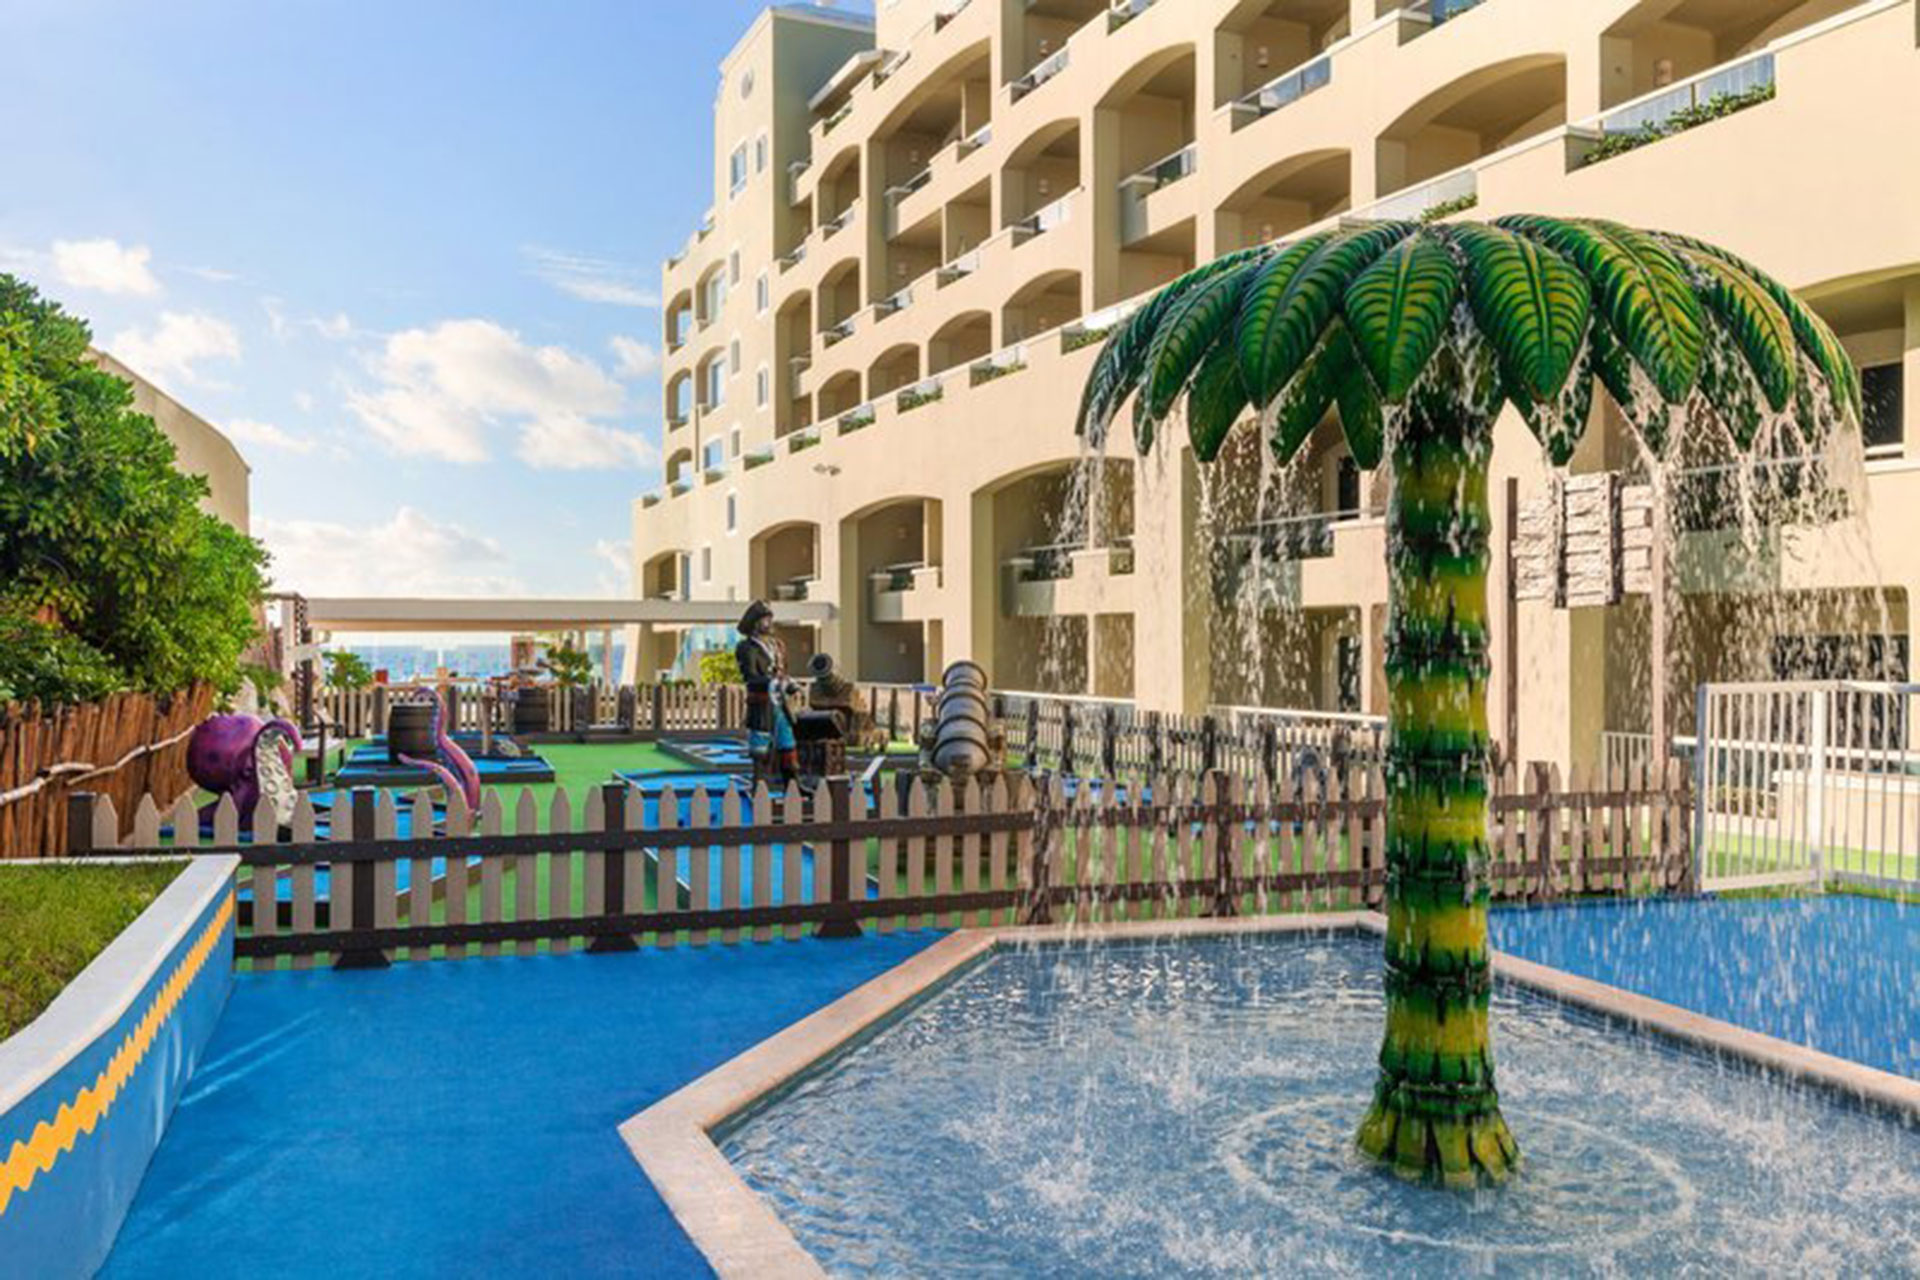 Fun Under the Sun in Mexico at Sunscape Resorts! | Family 